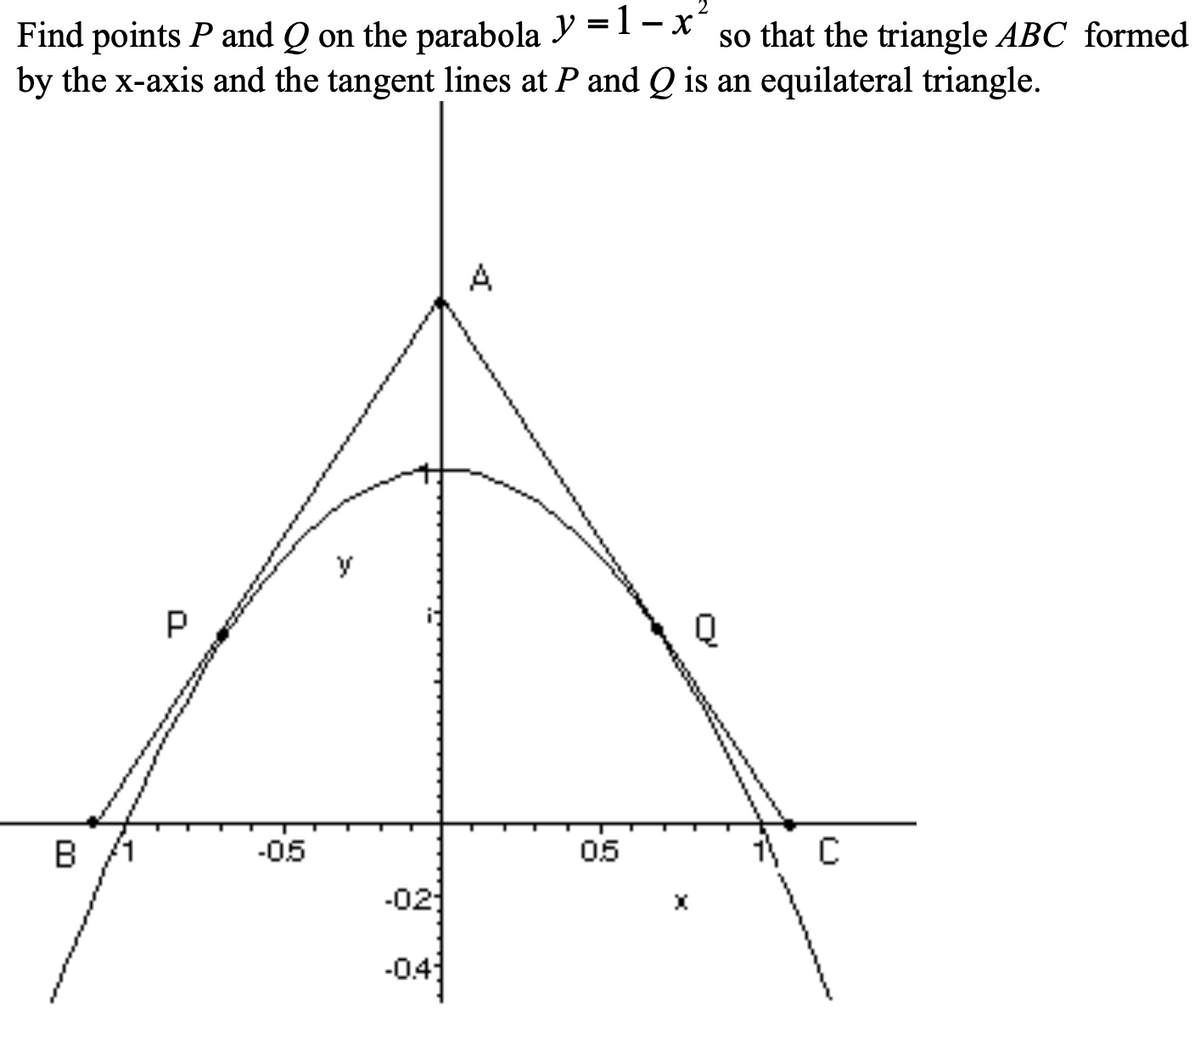 Find points P and Q on the parabola y =1-x so that the triangle ABC formed
by the x-axis and the tangent lines at P and Q is an equilateral triangle.
A
P
Q
B /1
-05
05
-02
-04
